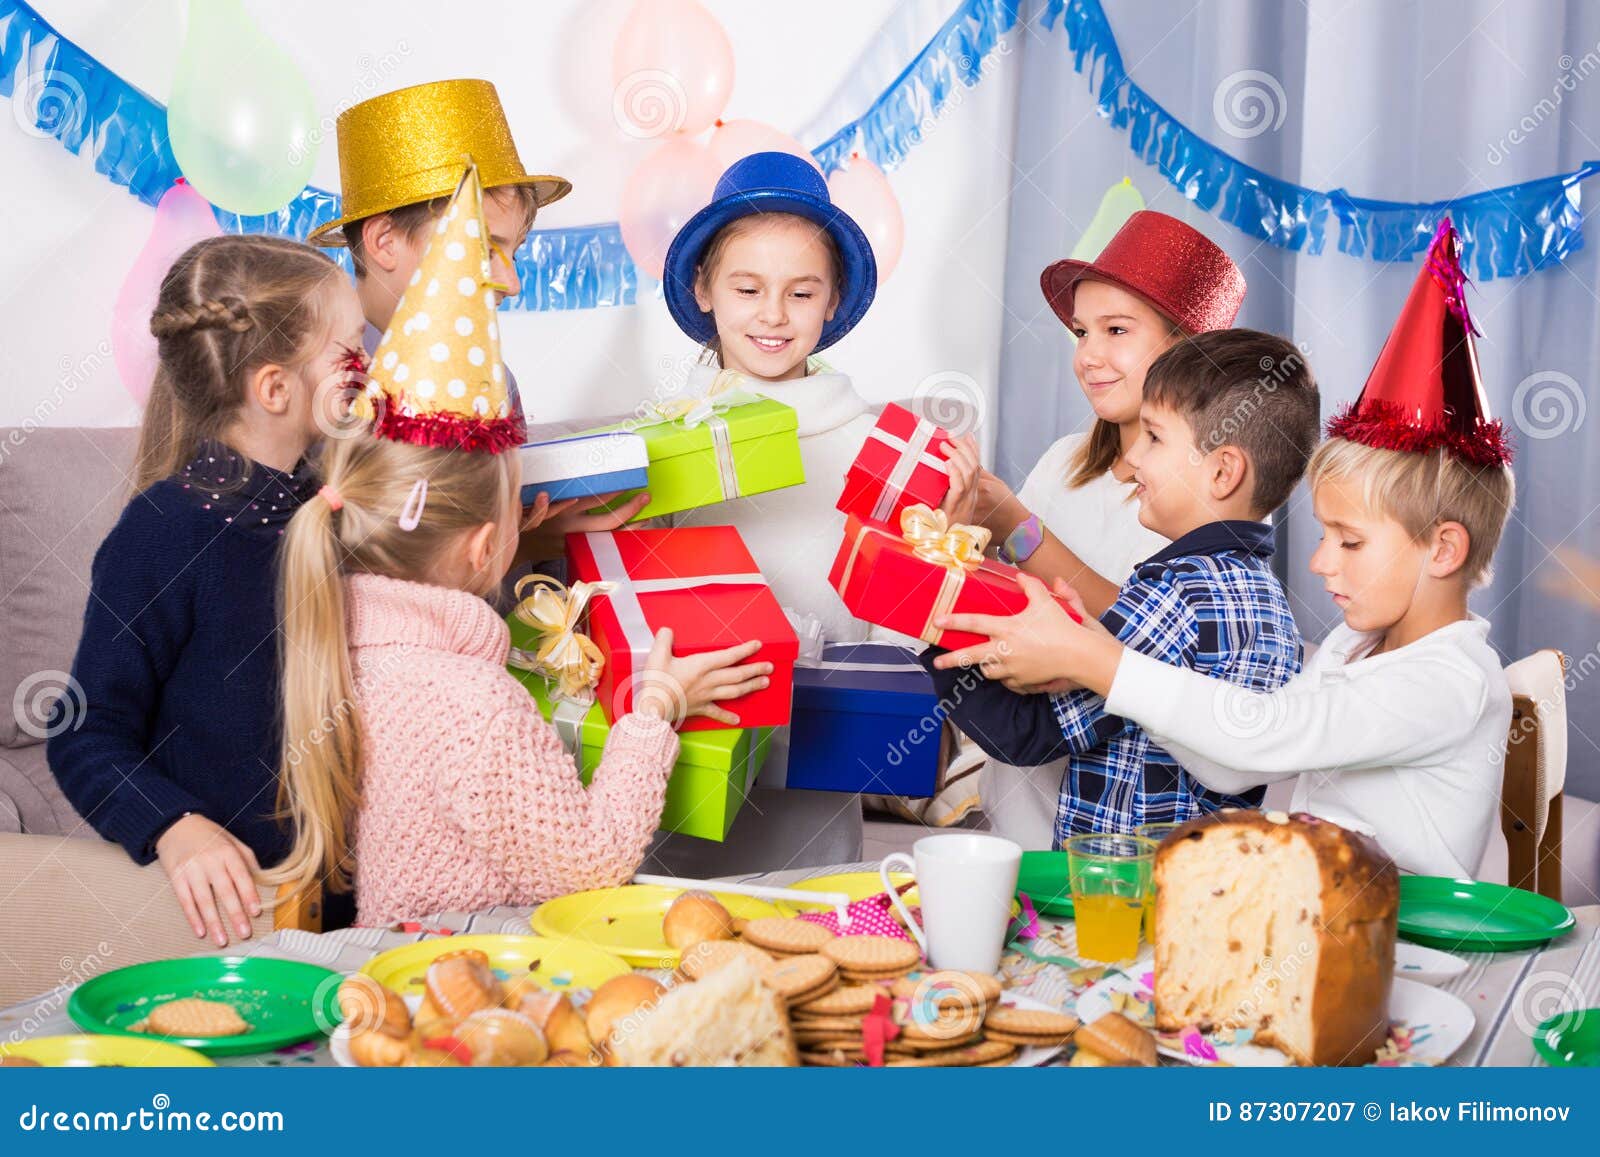 Happy Children Presenting Gifts To Girl Birthday Stock Image - Image of ...